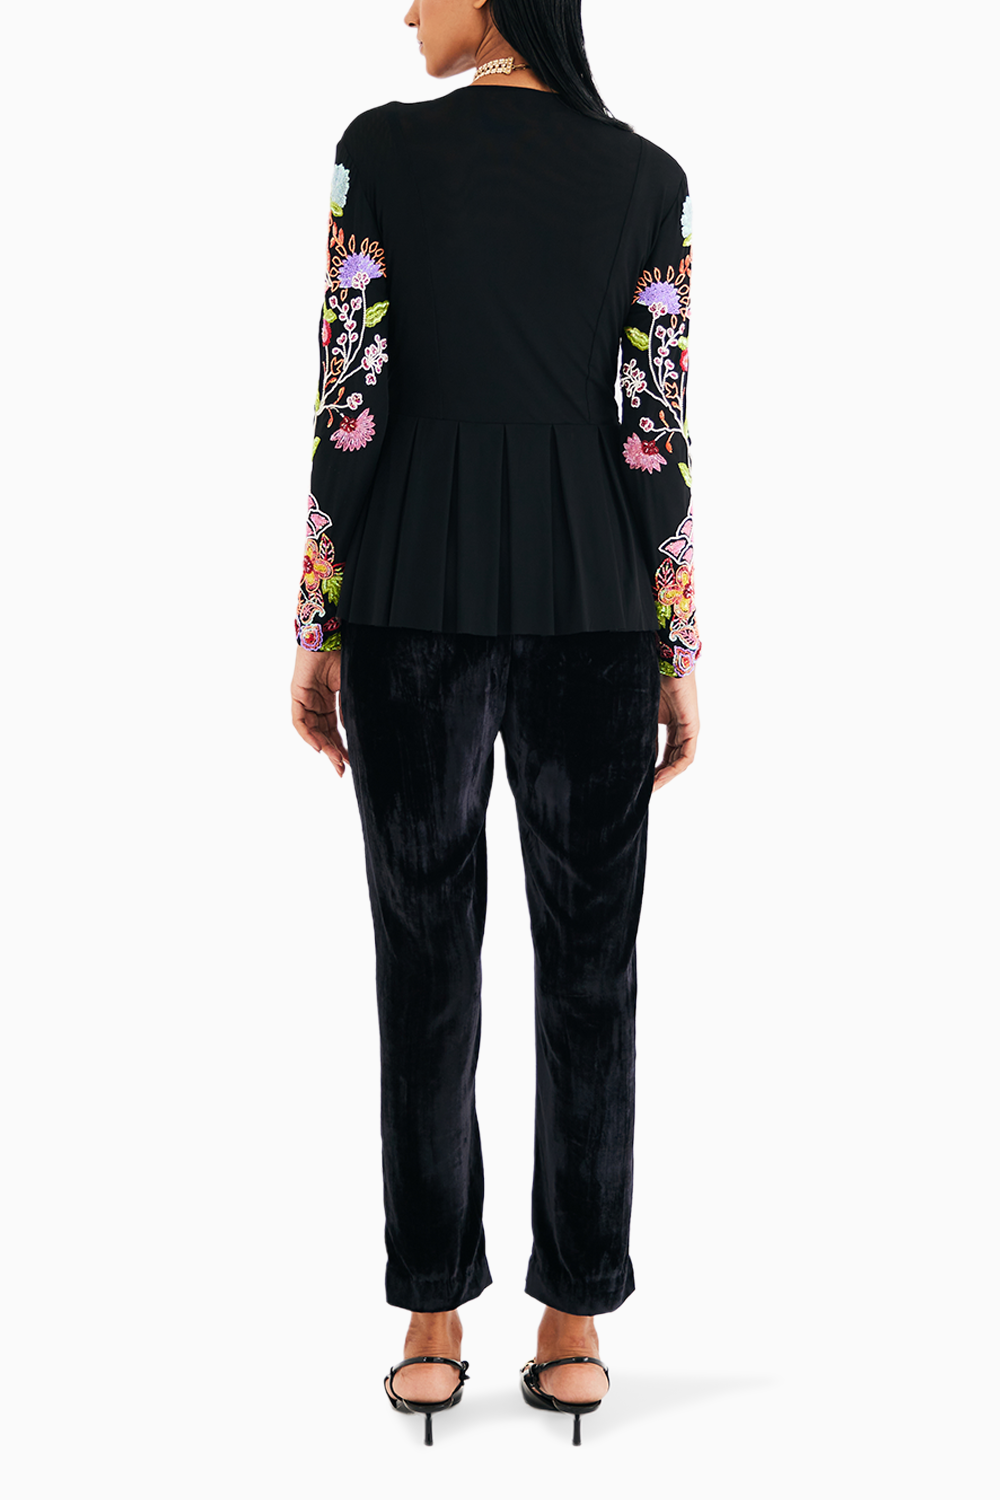 Black Embroidered Floral Net Top And Narrow Pants Set